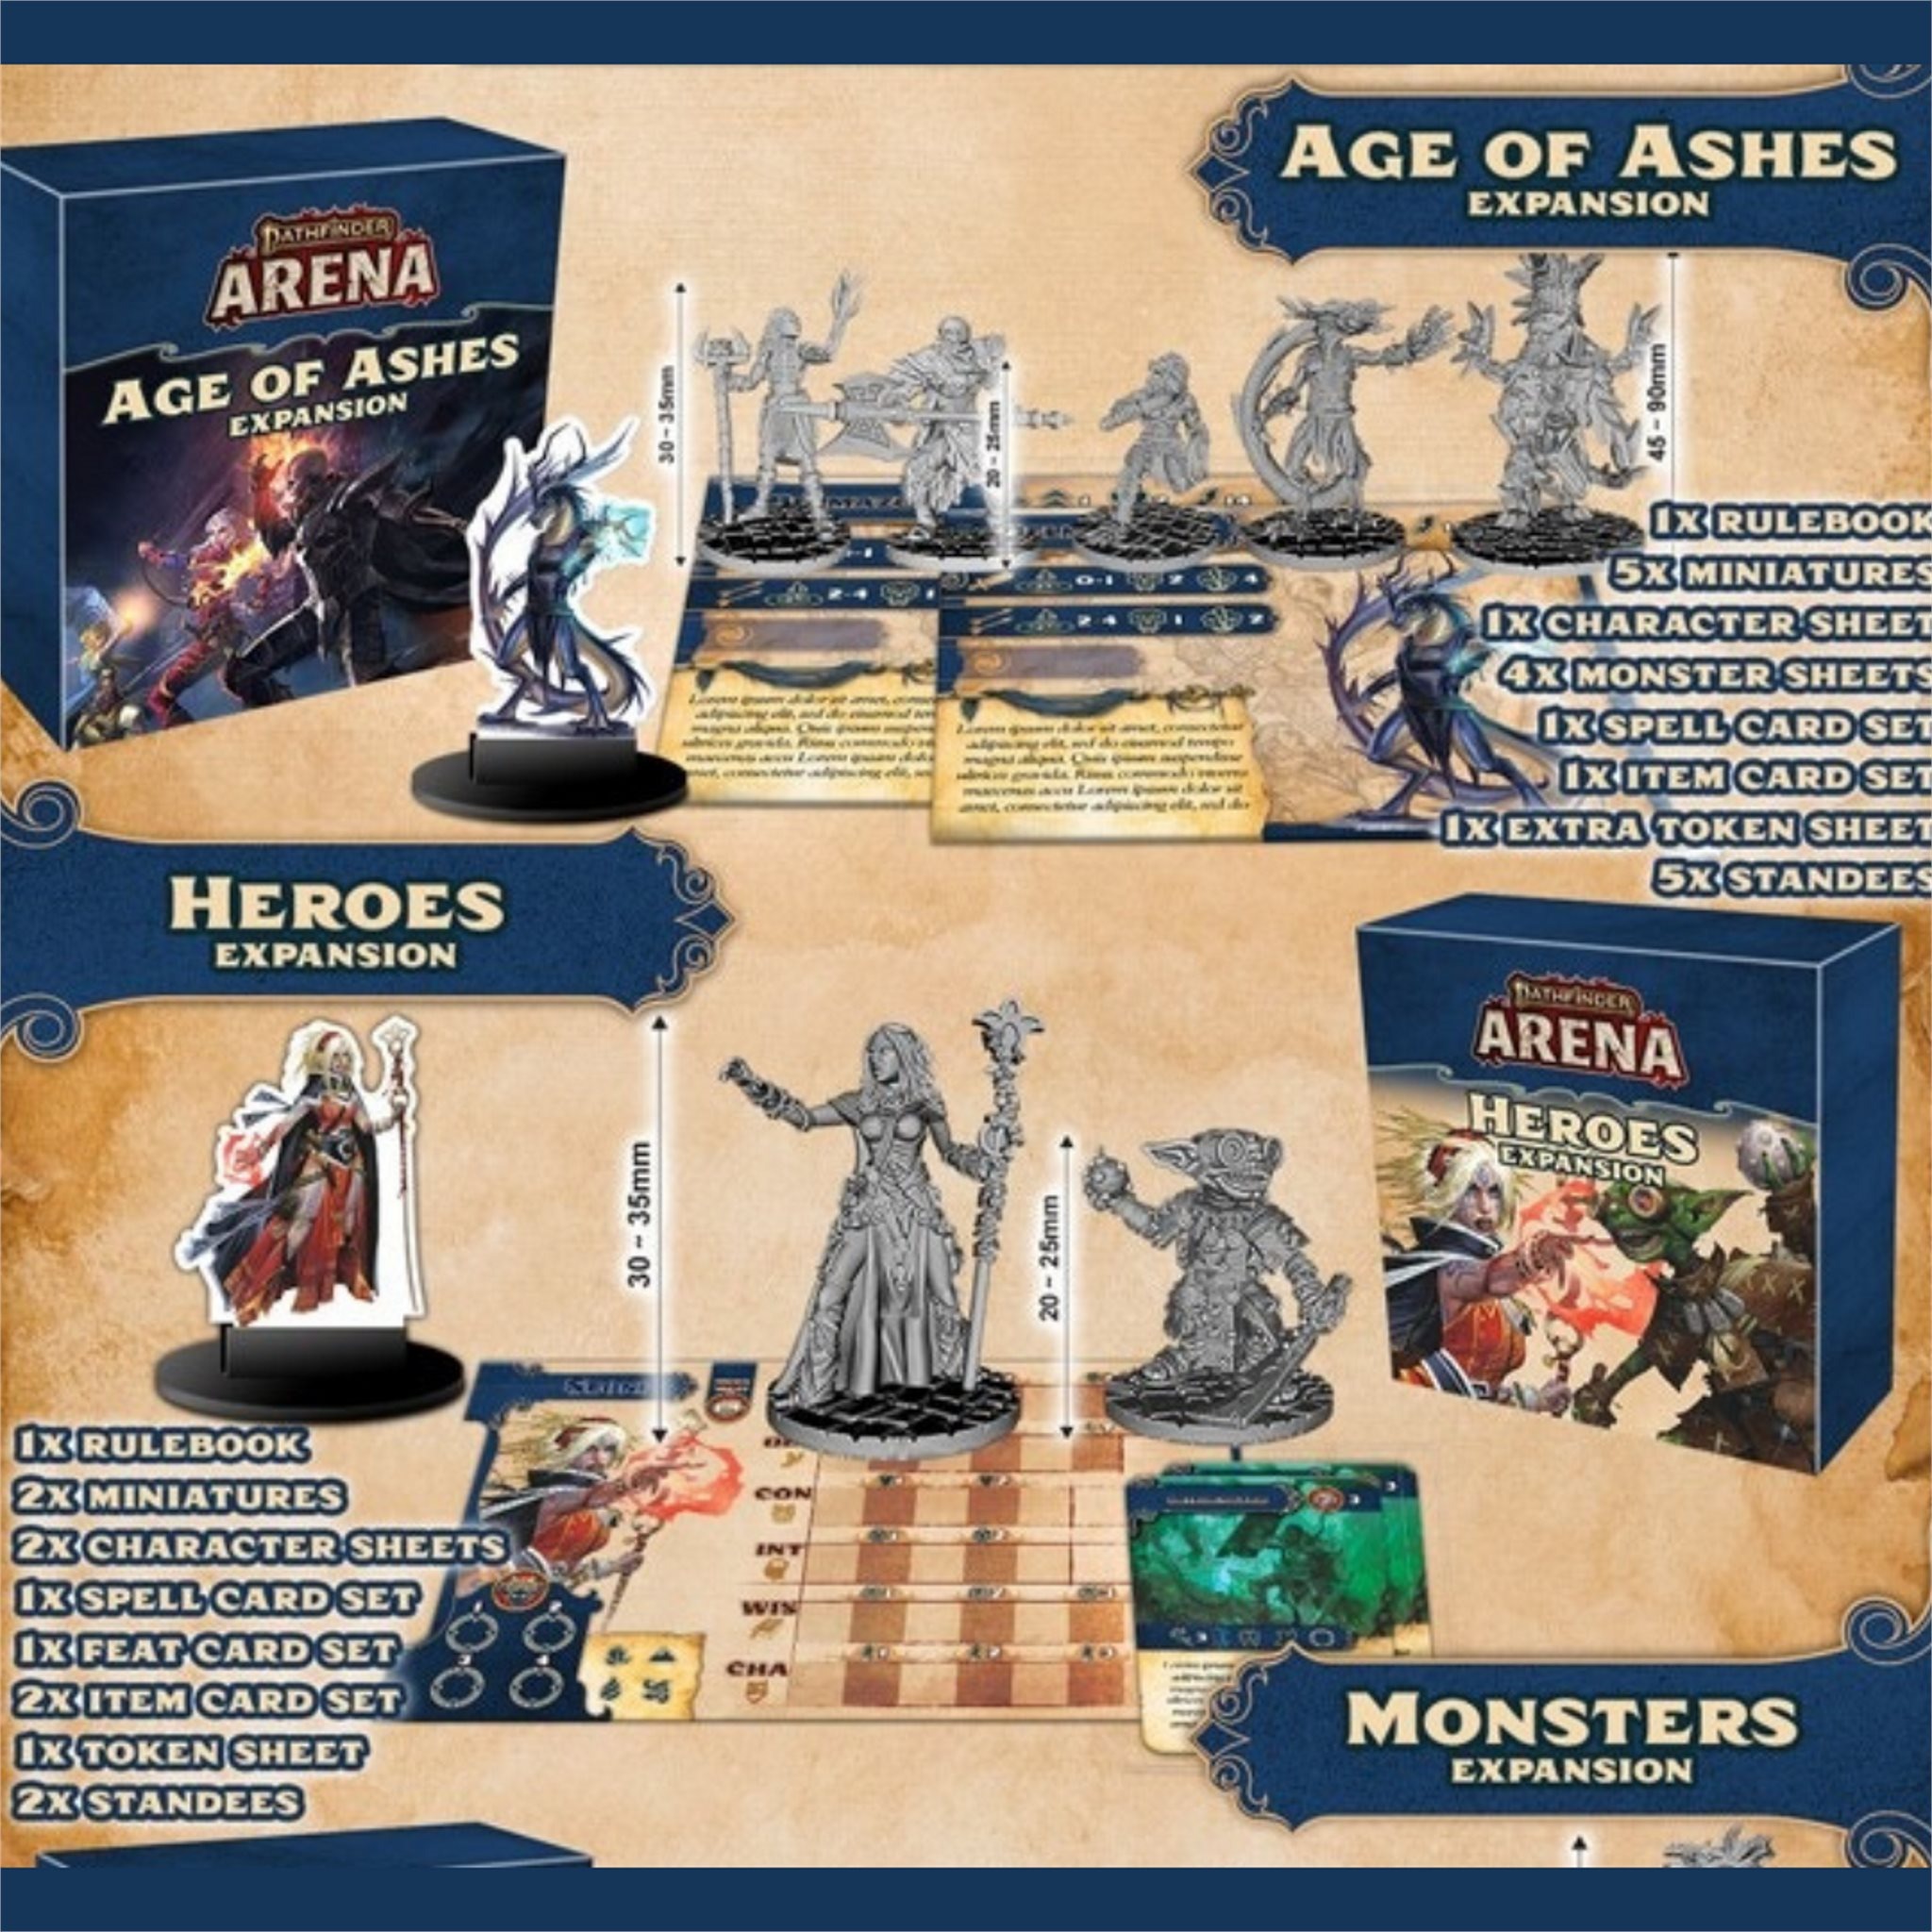 Pathfinder Arena - Age of Ashes